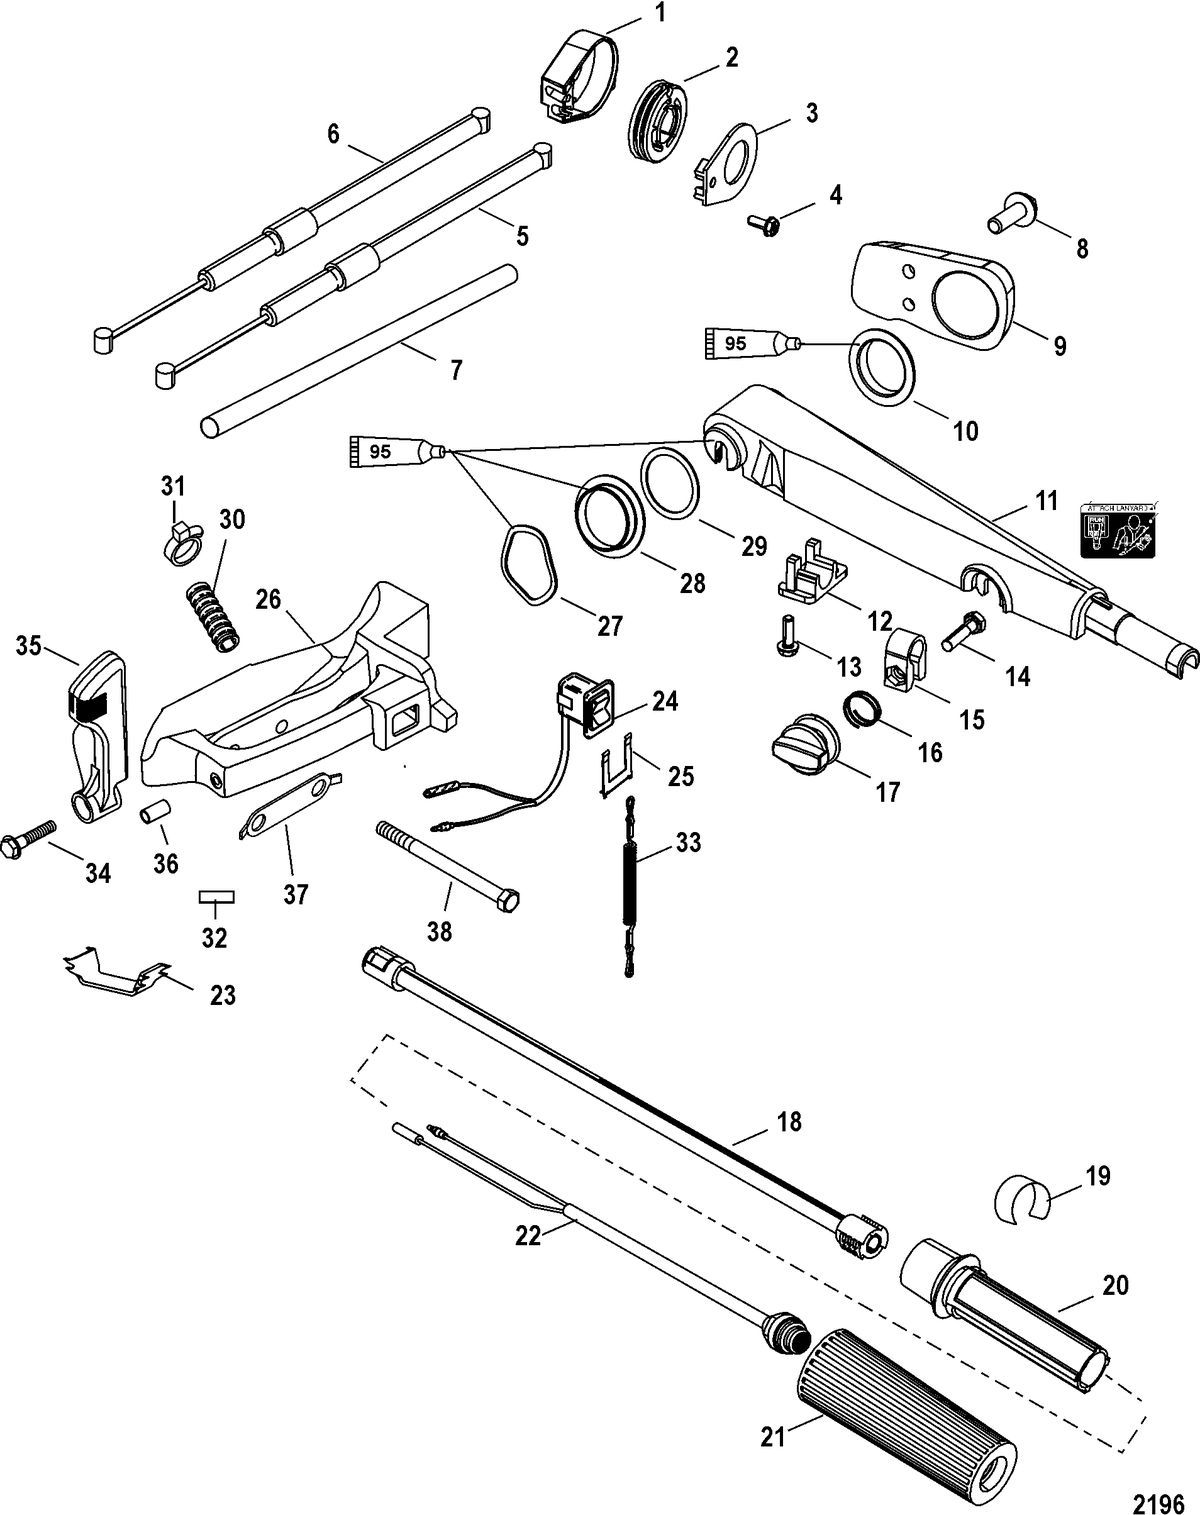 ACCESSORIES STEERING SYSTEMS AND COMPONENTS Tiller Handle Kit(880095A1/ A2/ A03/ A04 /A05 A09)